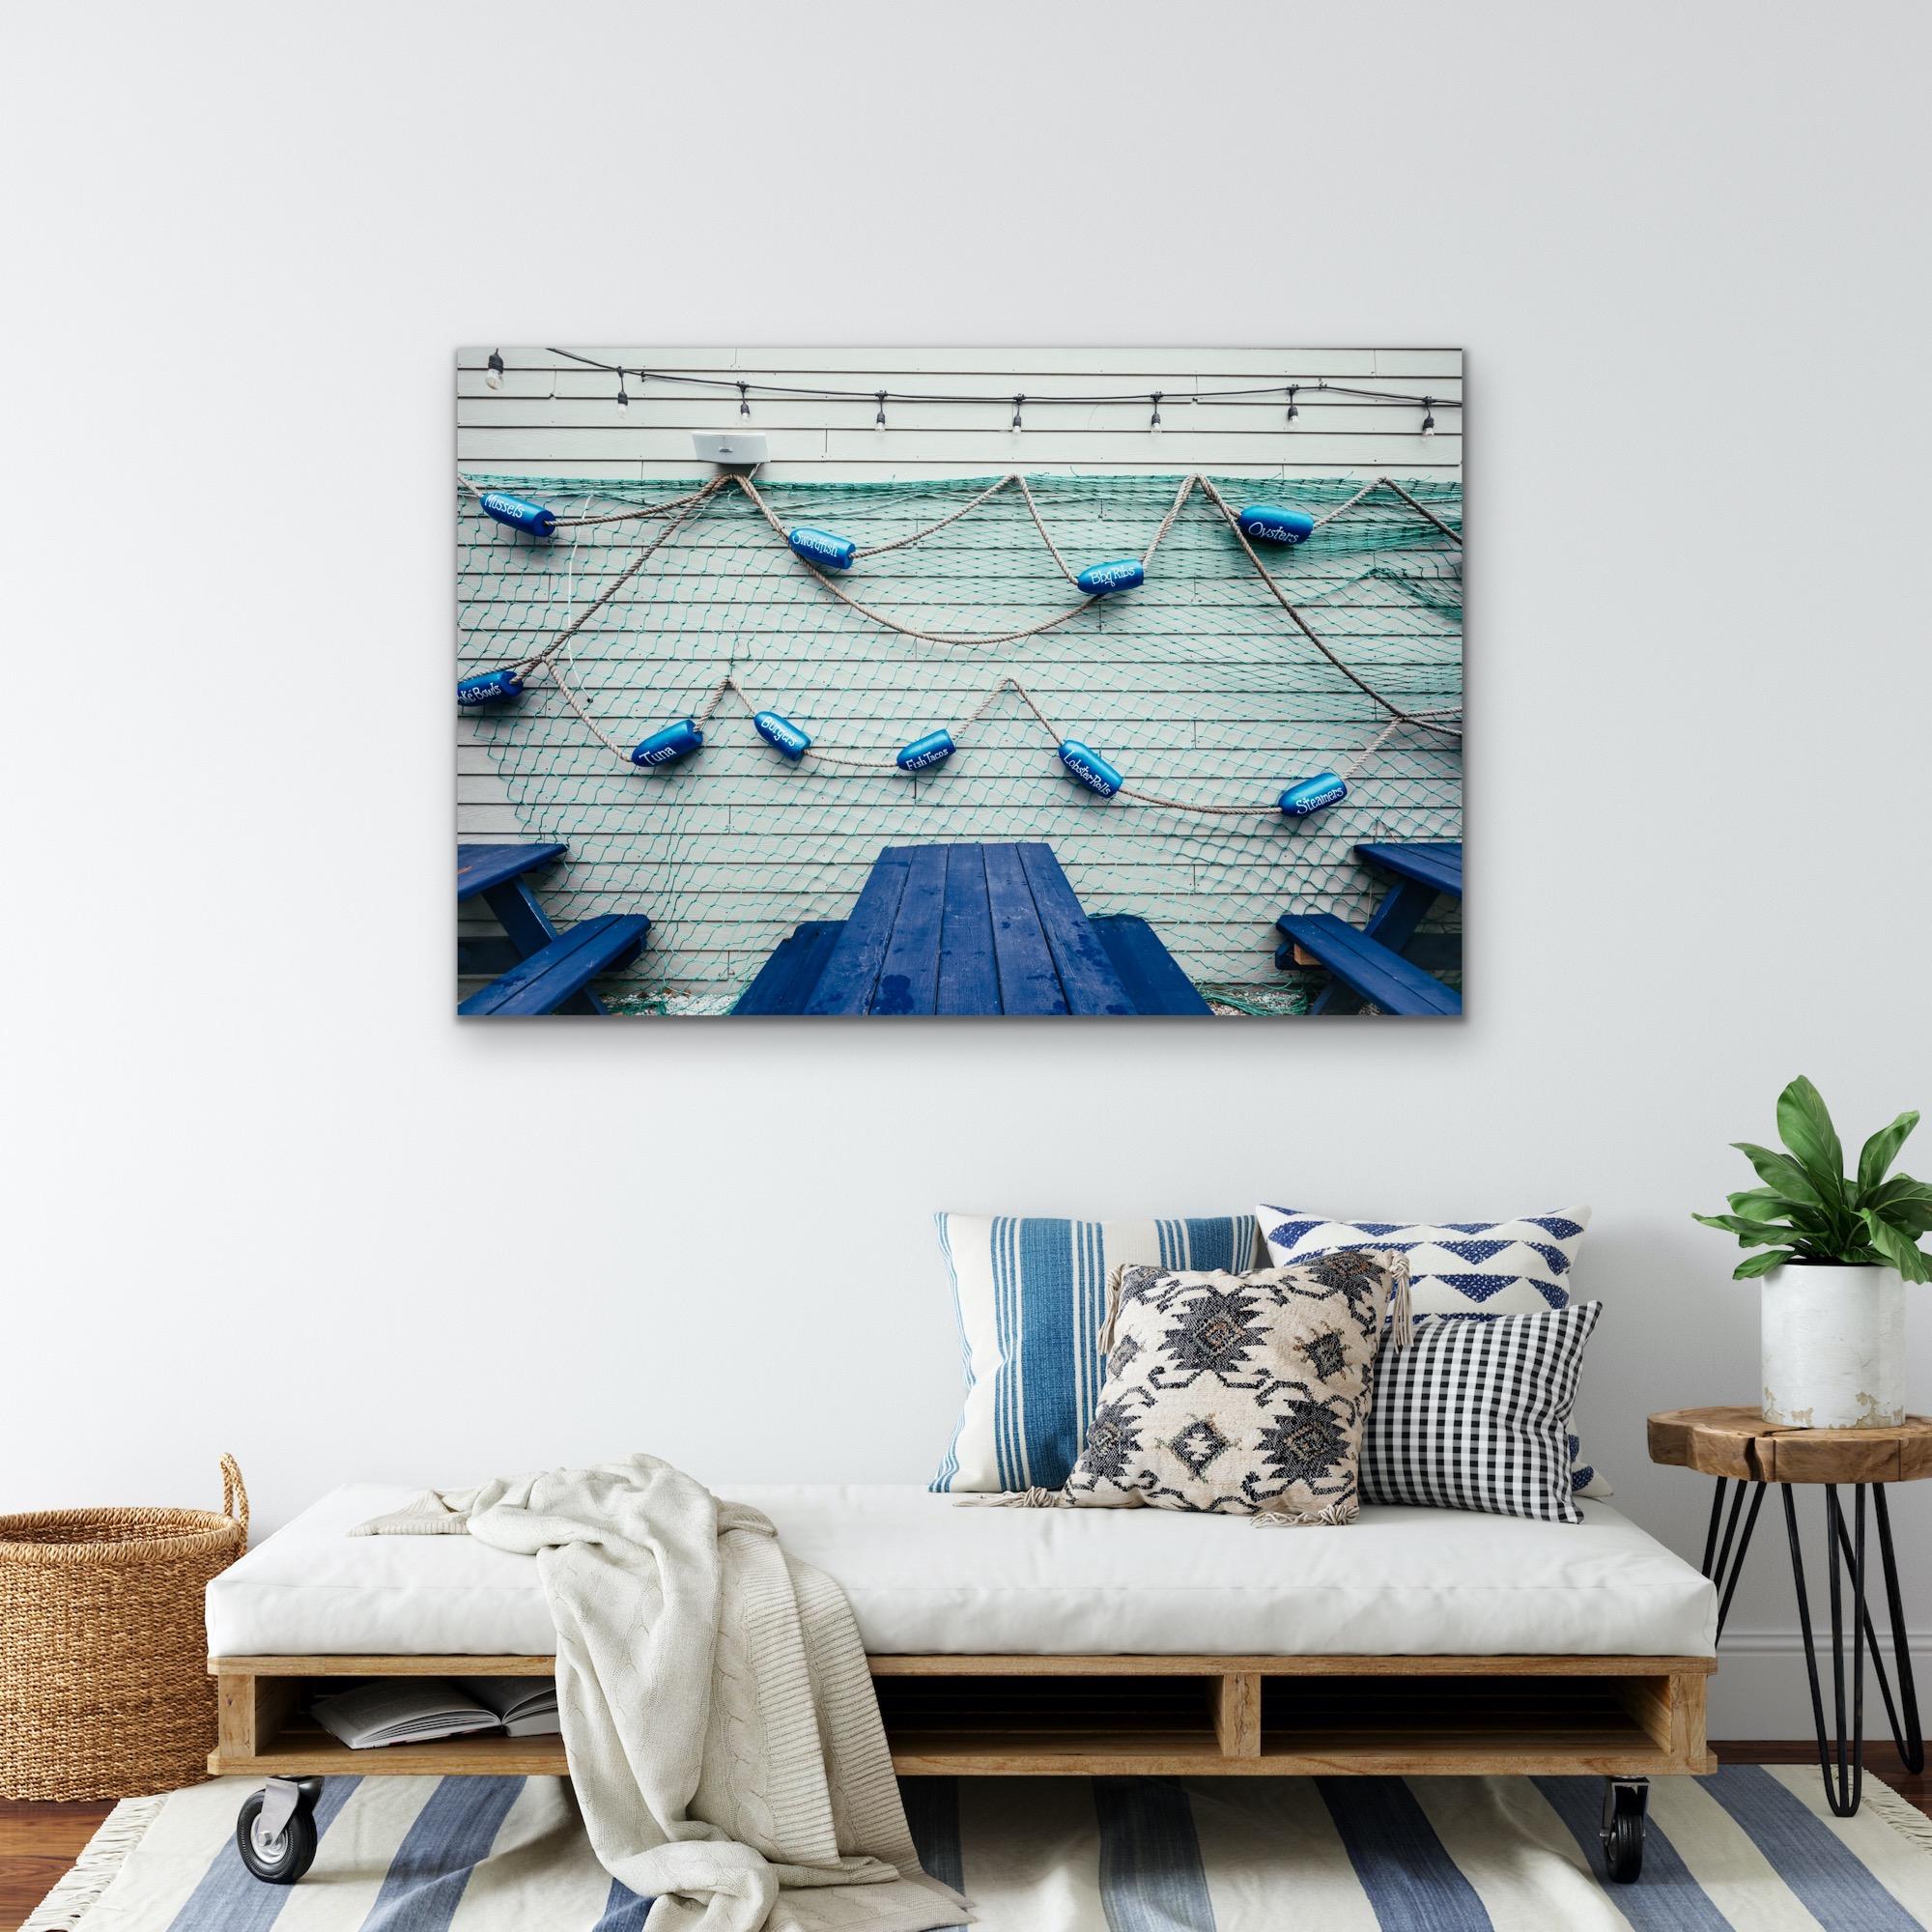 This contemporary coastal photograph has a cool blue palette. It captures a cropped view of blue picnic tables in front of the side of a building that has blue fishing net, buoys, and twinkle lights decorating the vinyl panelling. 

This is a metal